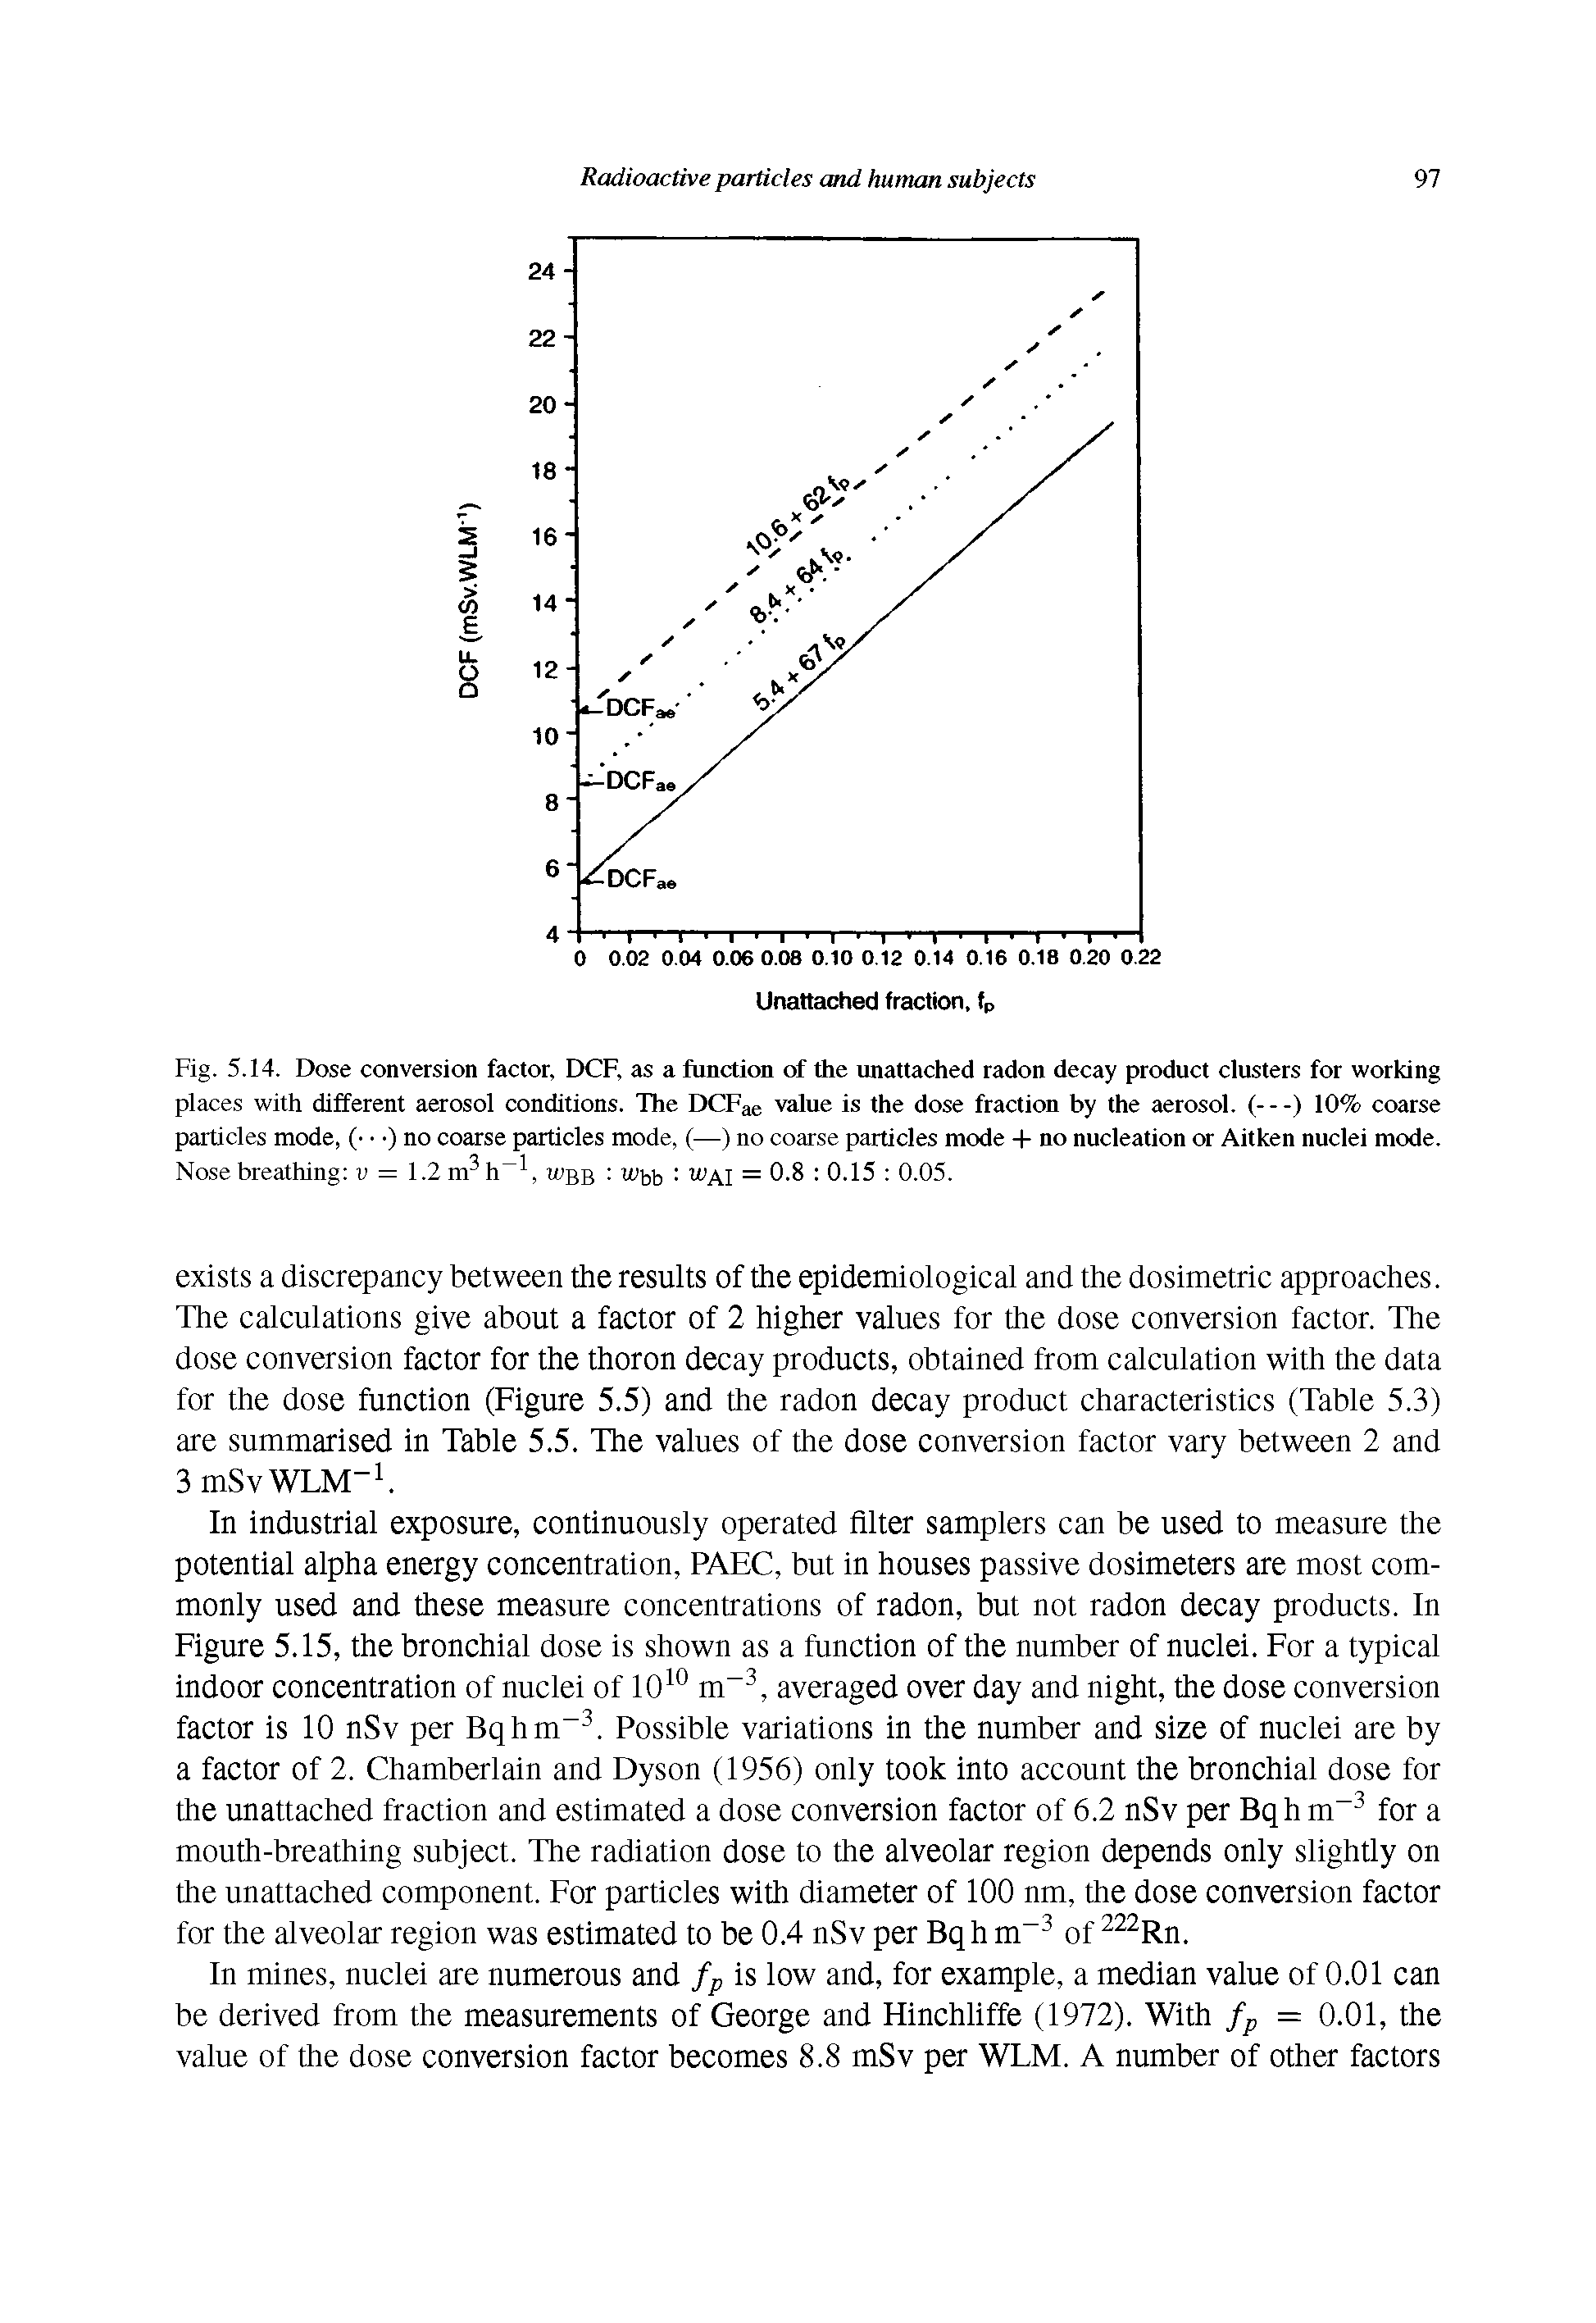 Fig. 5.14. Dose conversion factor, DCF, as a function of the unattached radon decay product clusters for working...